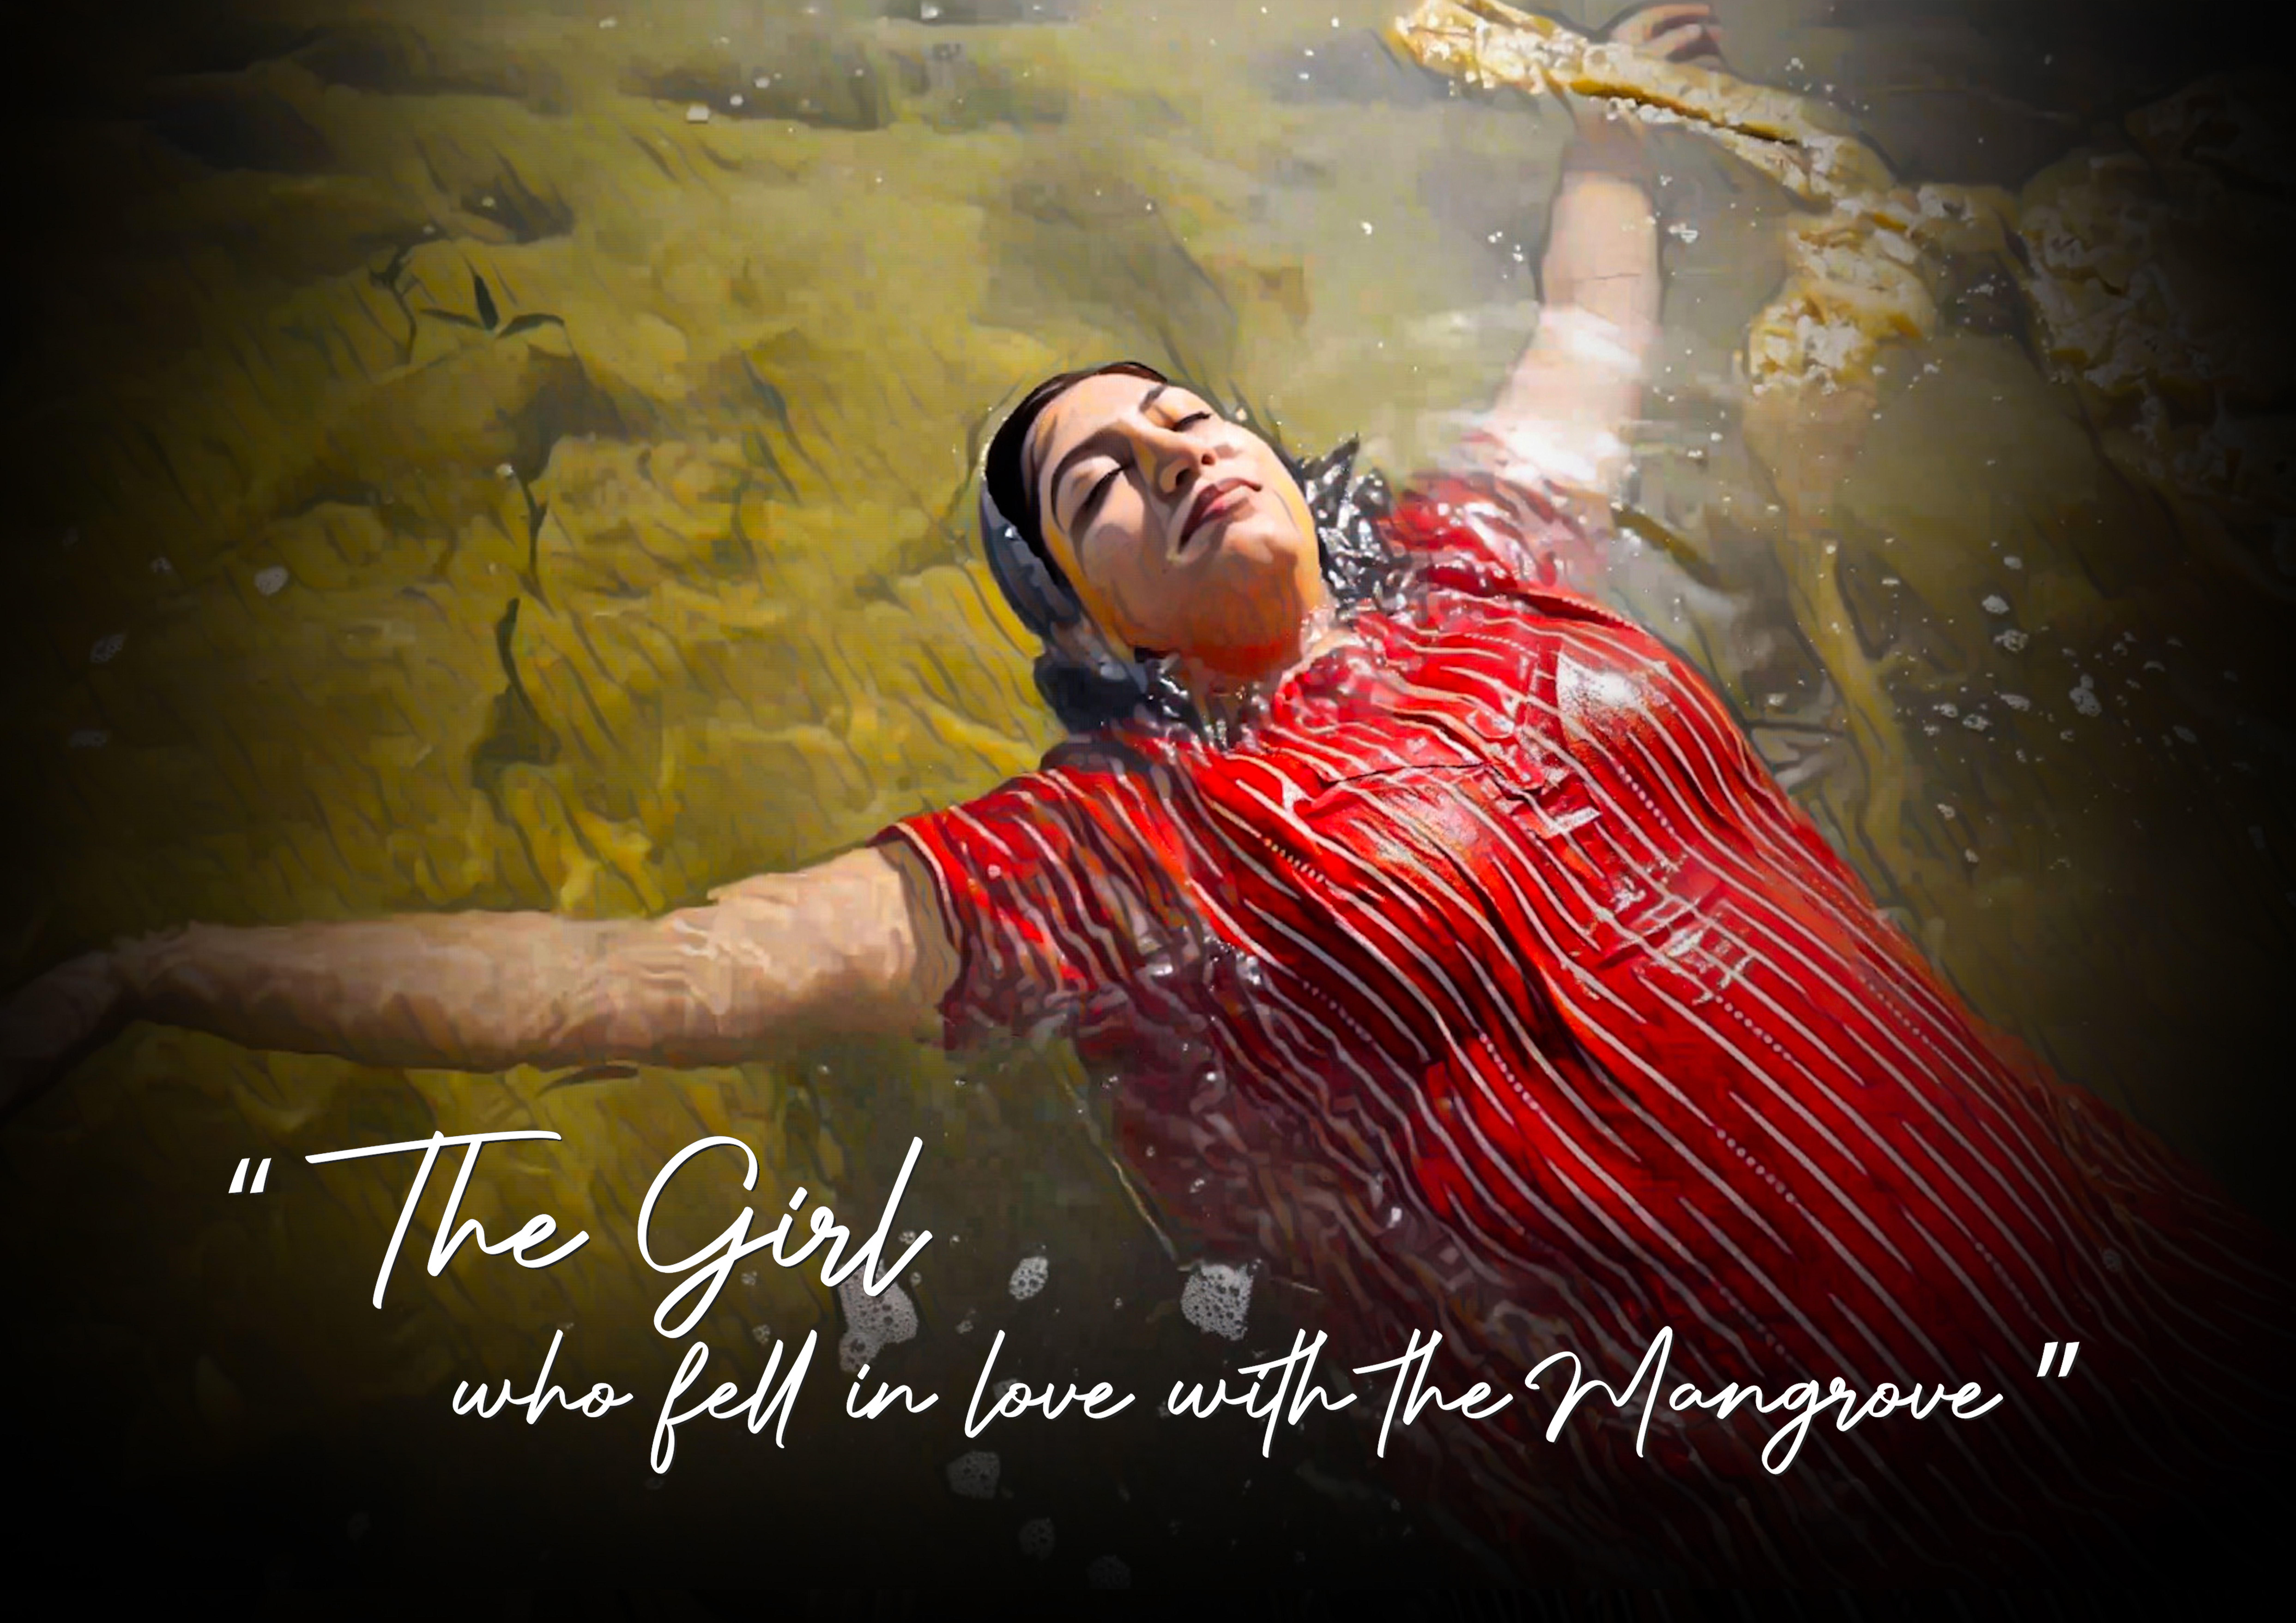 Photo extract from the video tale ‘The Girl who fell in love with the Mangrove’